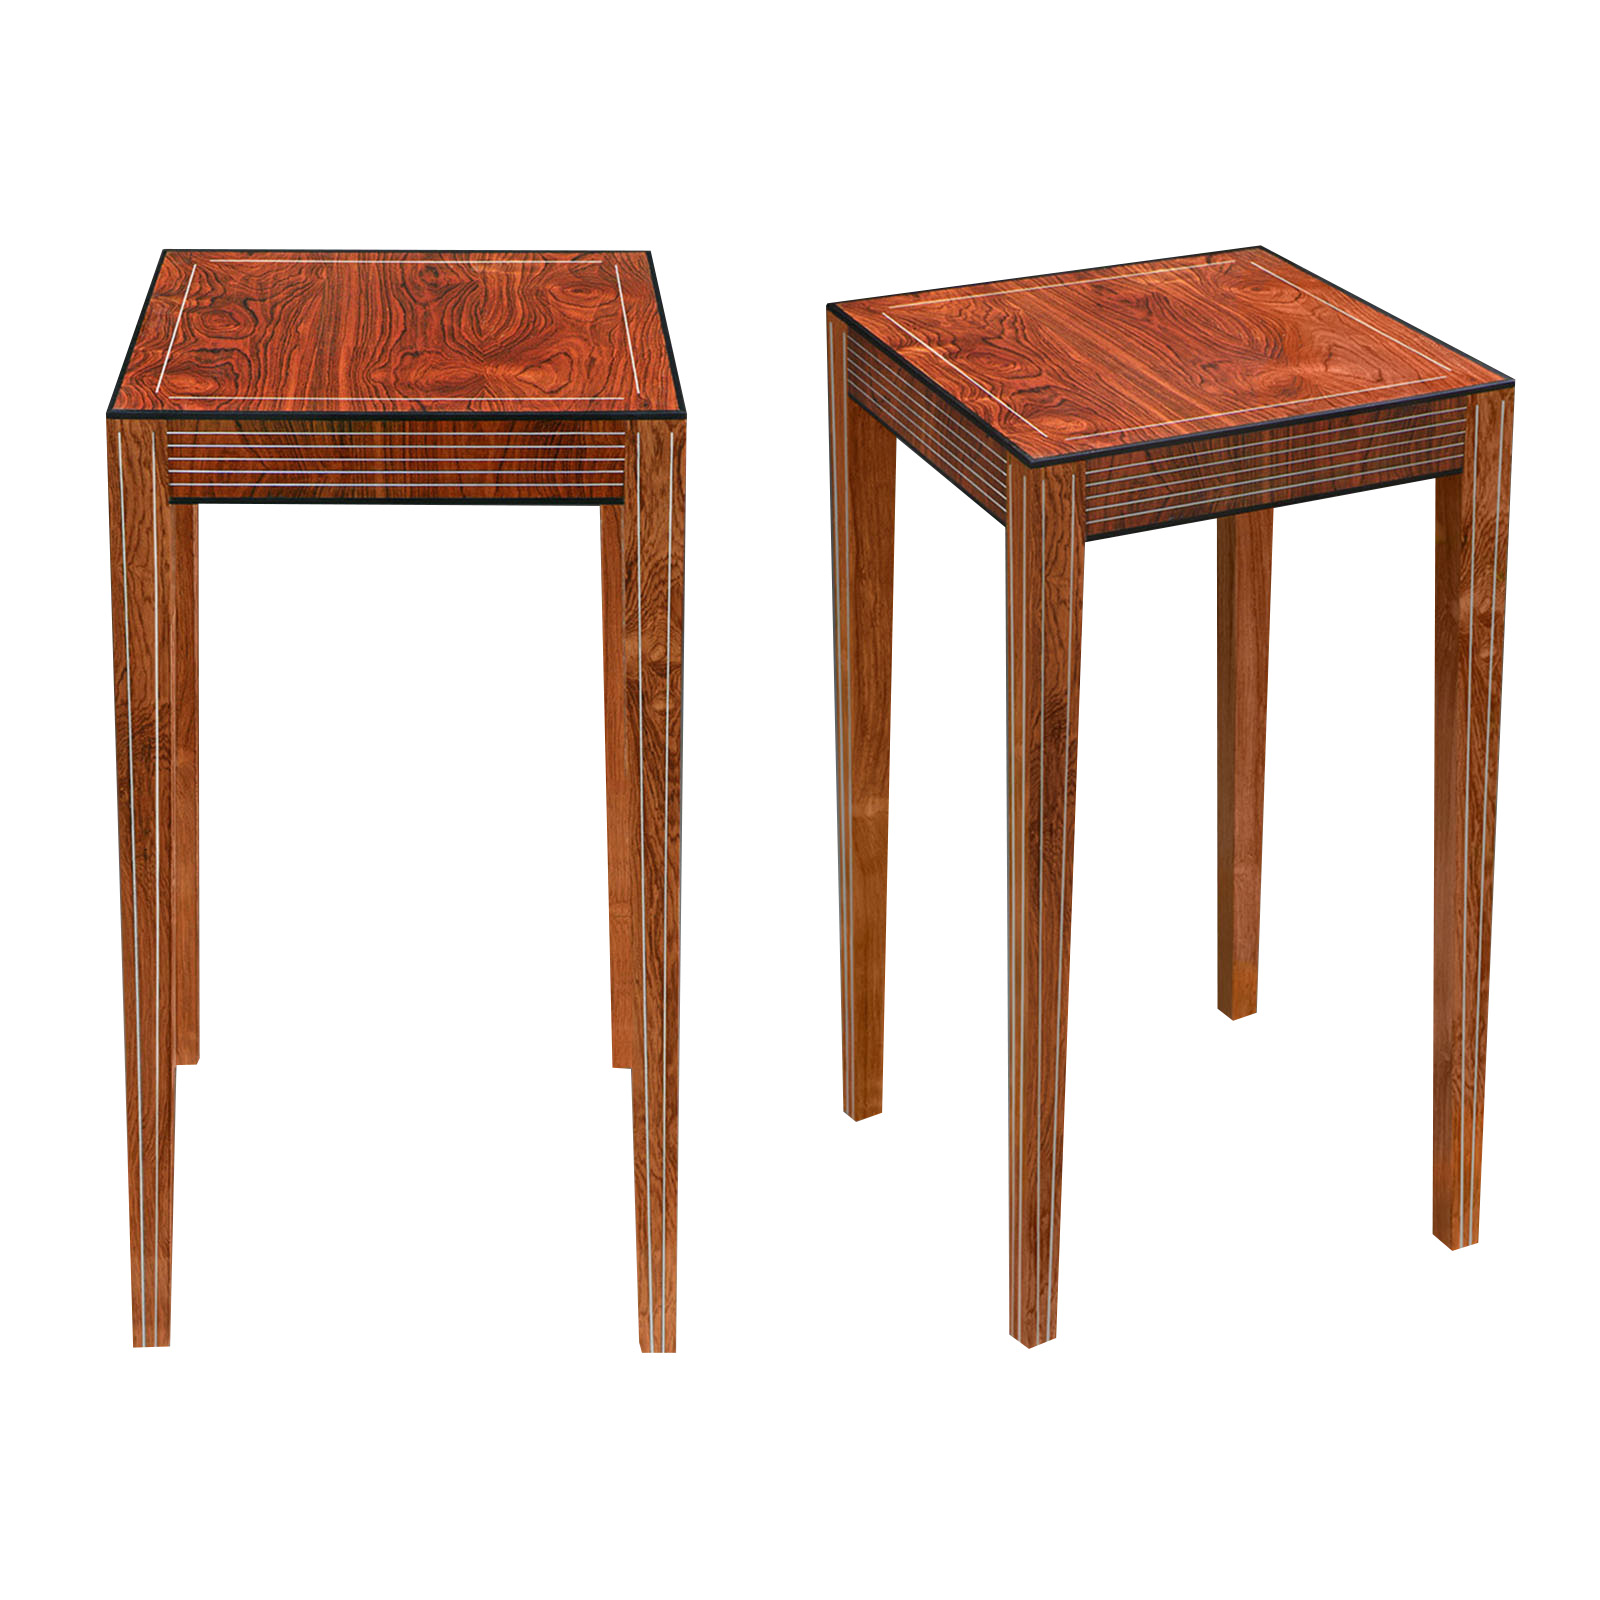 Pair of Brecon rosewood veneered tables. Made to order by Perceval Designs